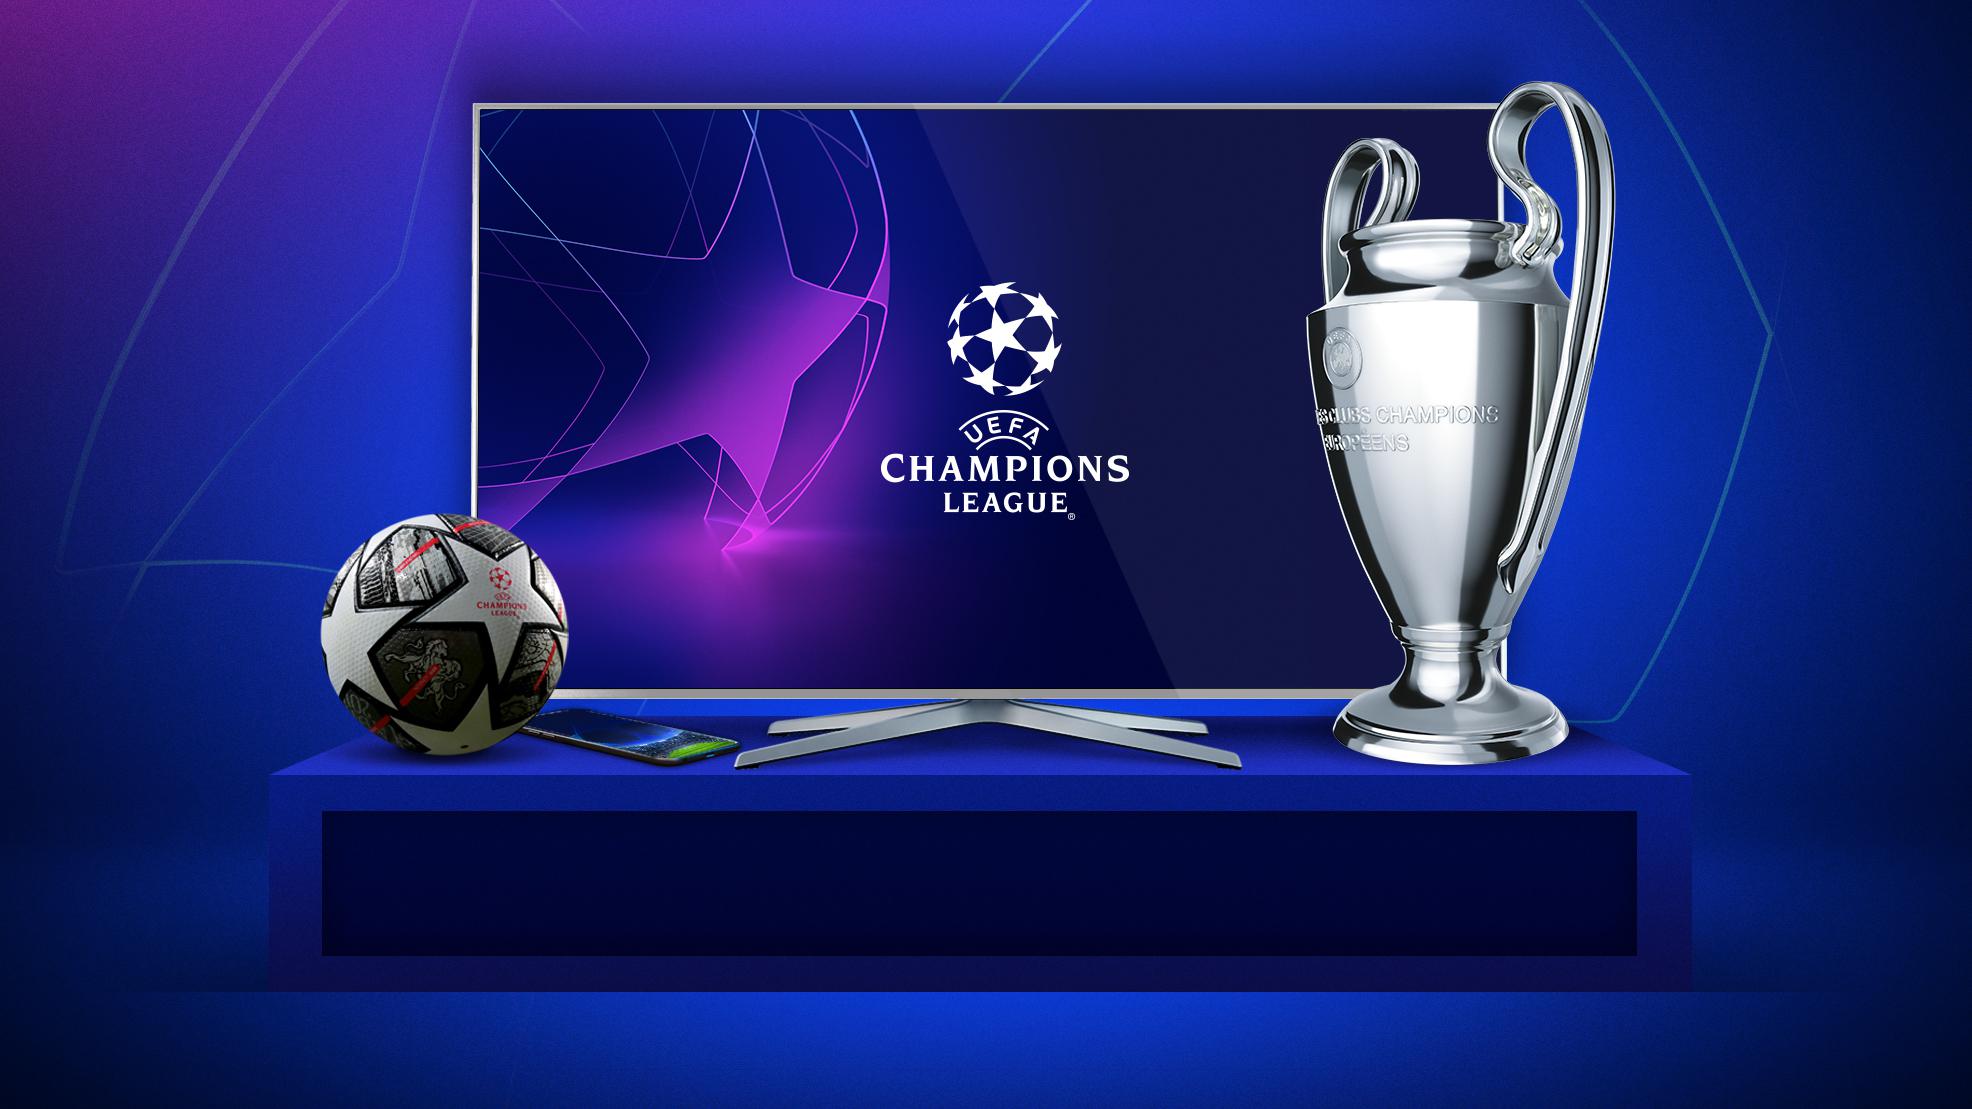 Champions League Broadcasting Channel Finland, SAVE 36%